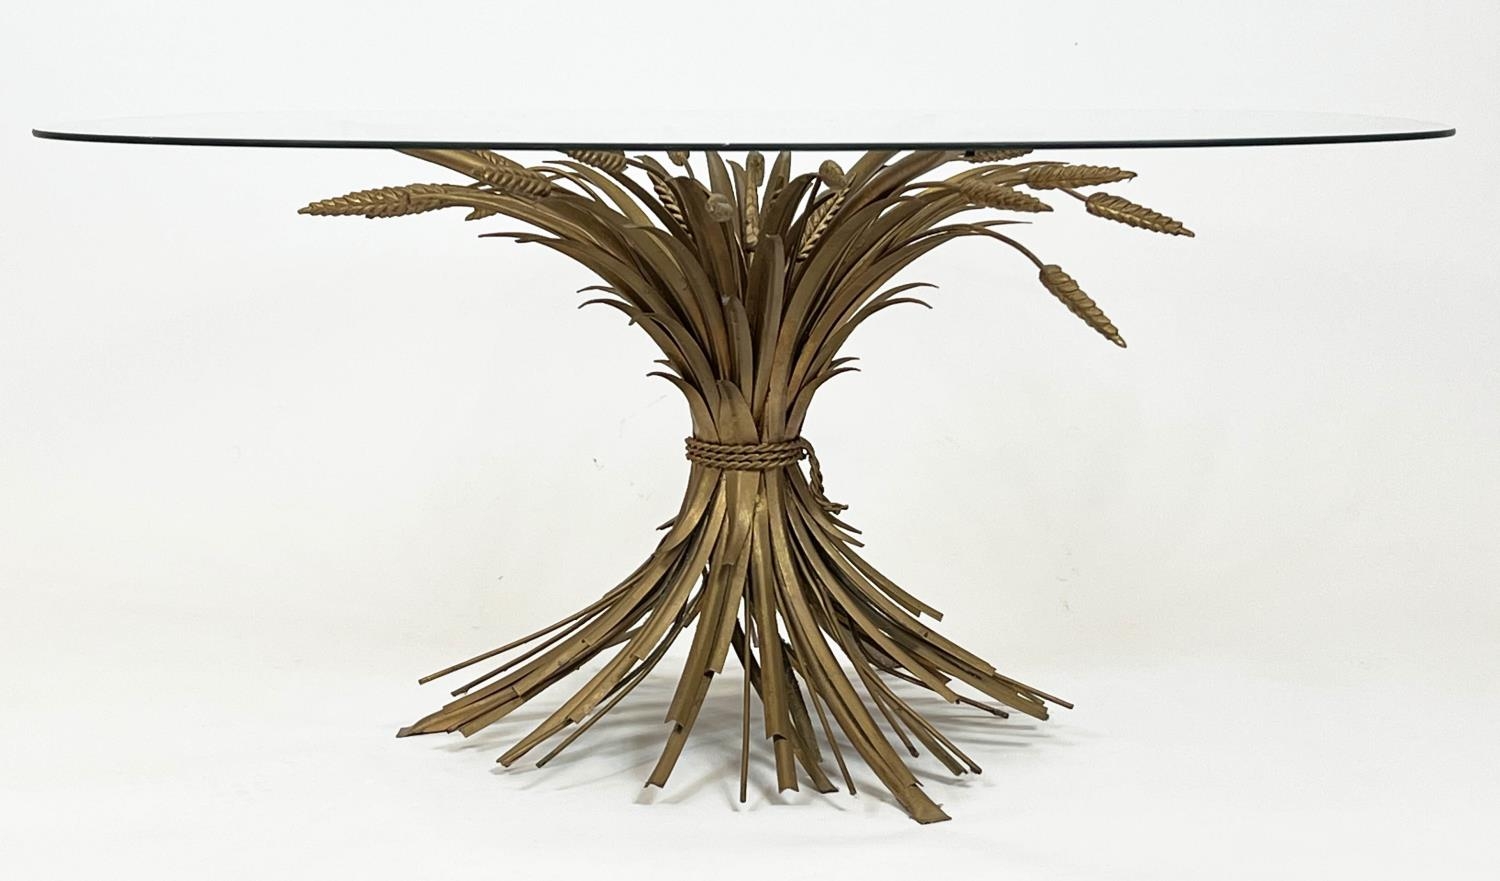 WHEAT SHEAF LOW TABLE, vintage French gilt metal with a glass top, 46cm H x 95cm x 95cm. - Image 3 of 4